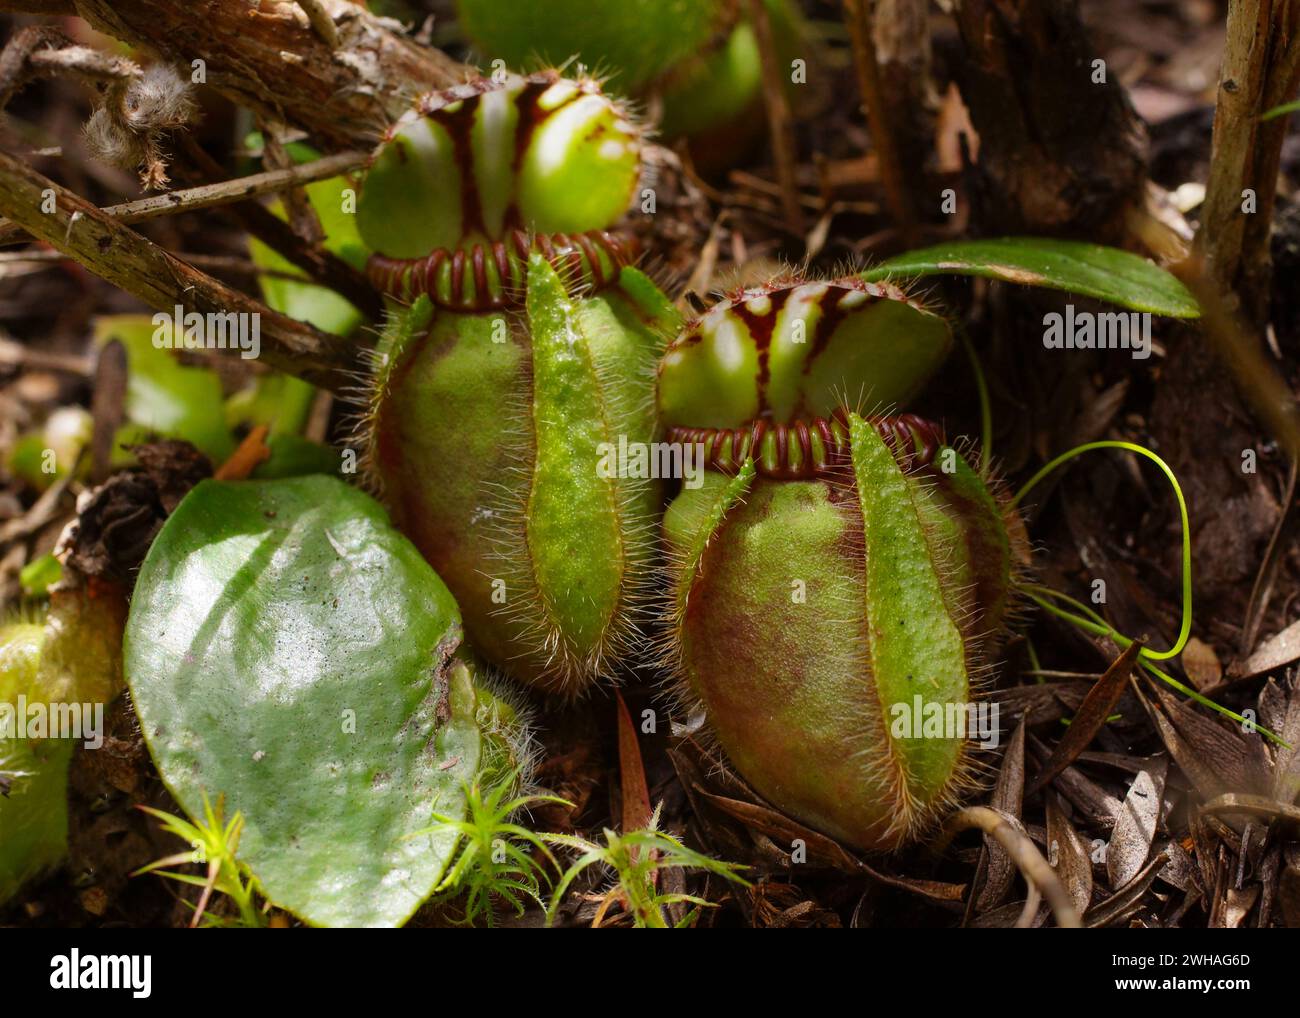 Albany pitcher plant (Cephalotus follicularis), close-up of two pitchers, in natural habitat, Western Australia Stock Photo